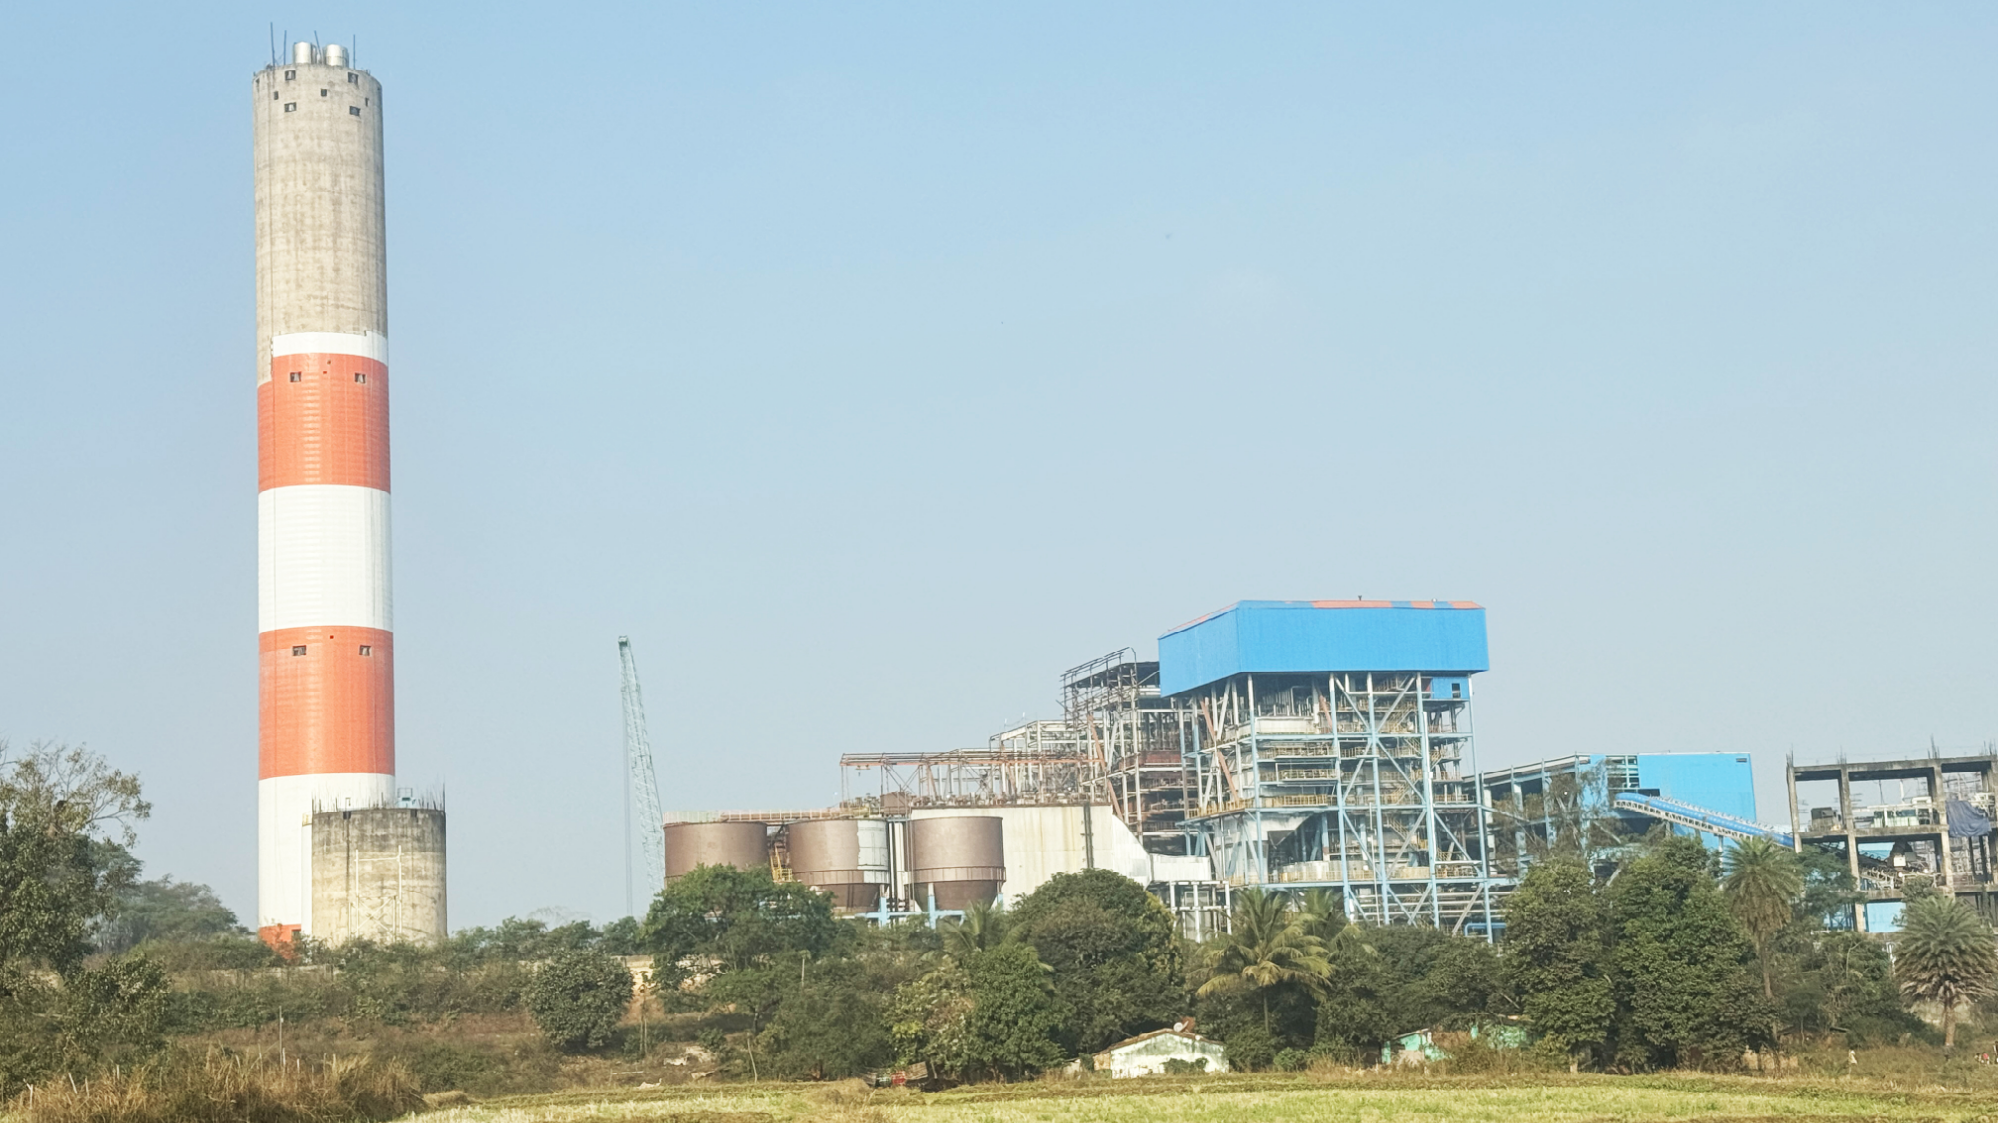 Congratulations！Transforming Waste into Treasure Vedanta Lanjigarh's 130MW Retrofit Project in India Unit 1 Successfully Connected to the Grid on Its First Attempt！